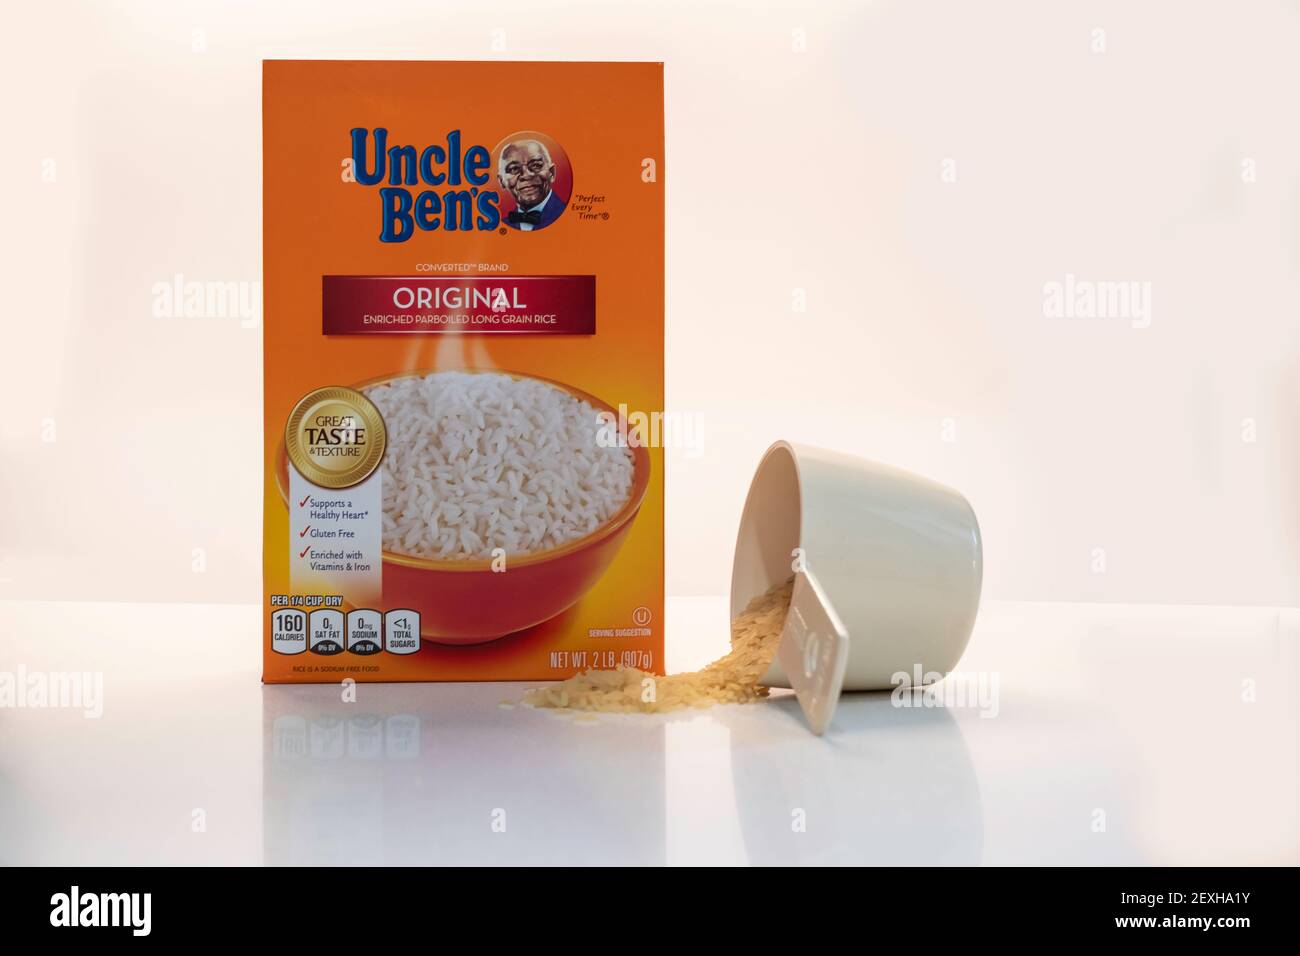 A box of Uncle Ben's rice isolated on white with spilled rice, a subject of objection due to racial injustice and prejudicial outrage because of t Stock Photo